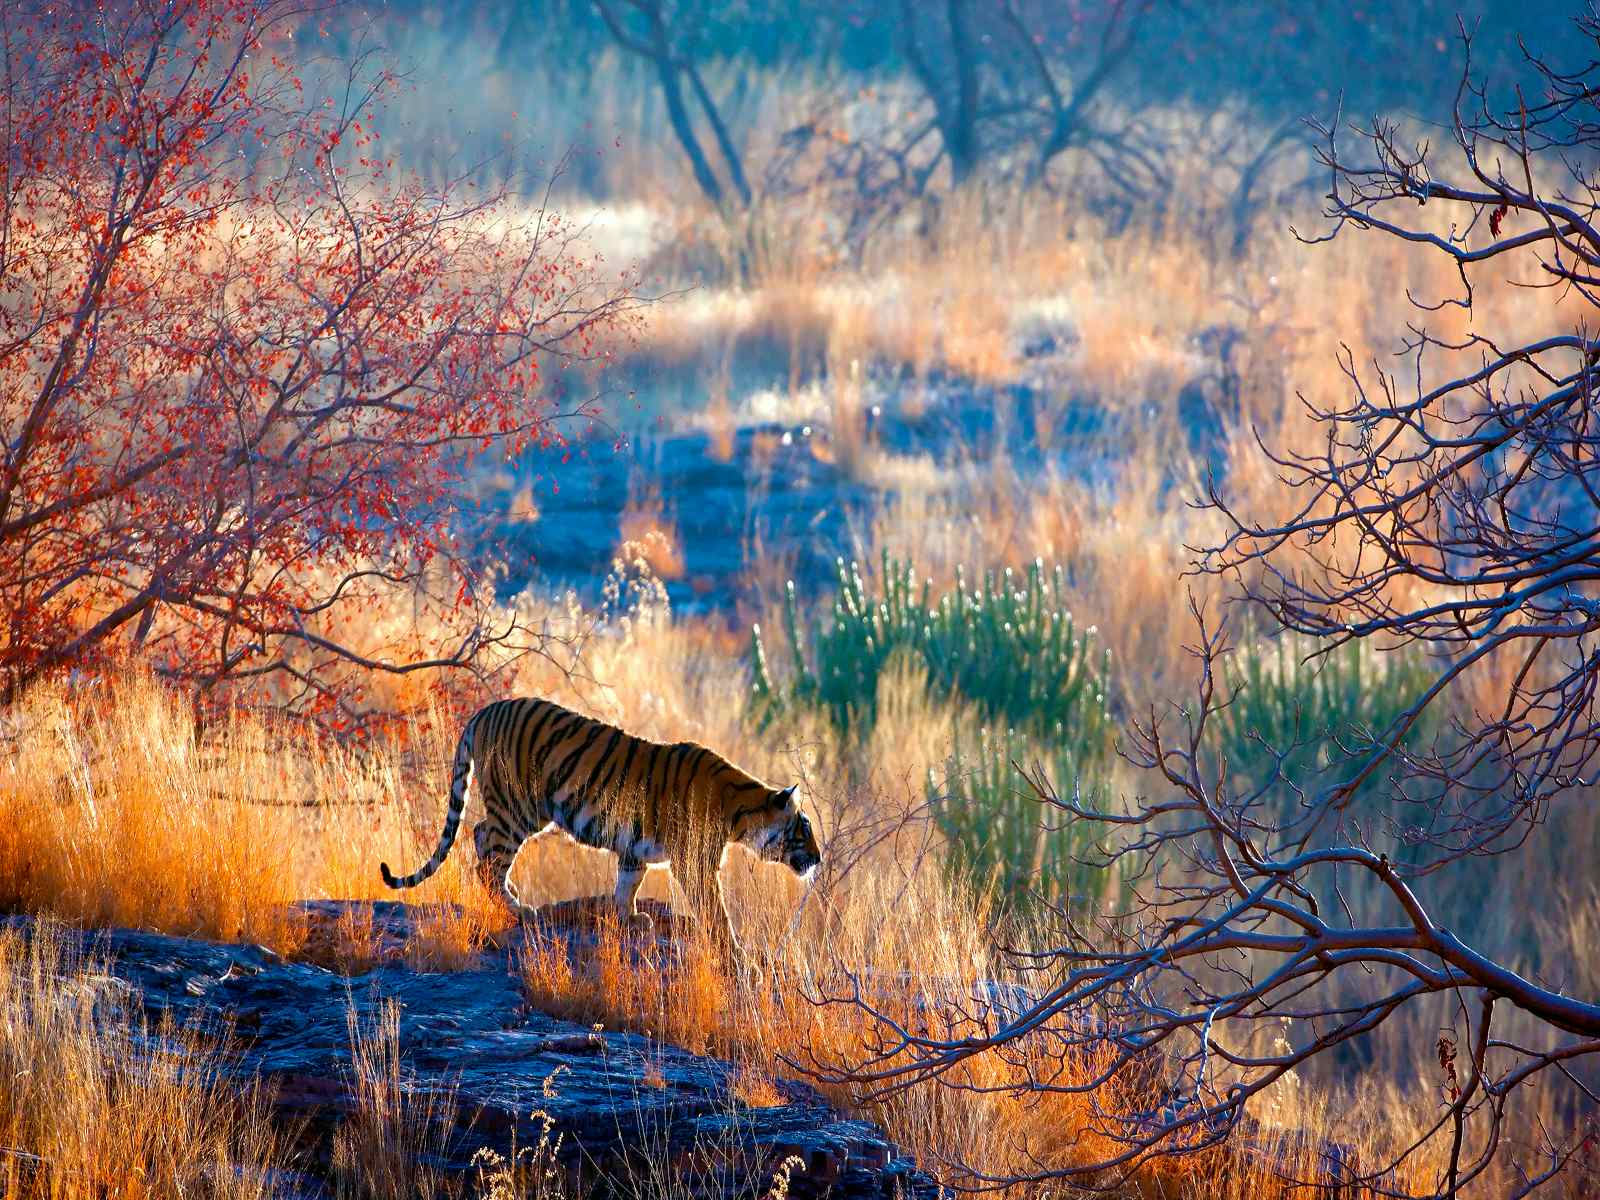 Ranthambore tiger safari in India. Photo: GettyImages-157739460